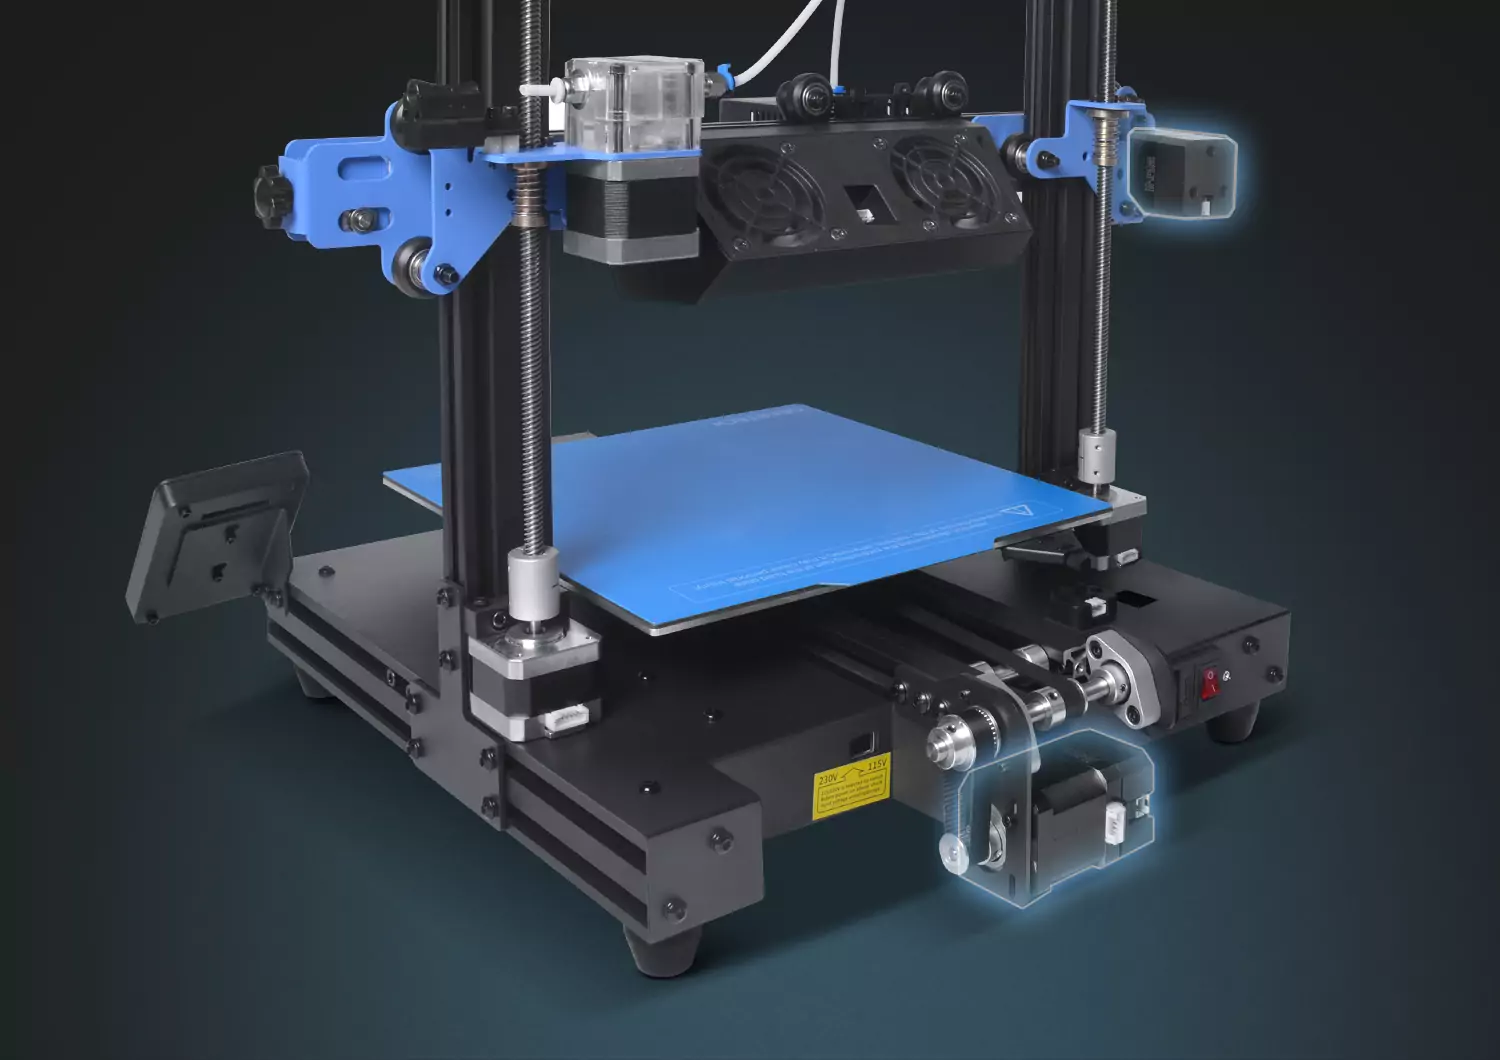 closed loop control | Geeetech THUNDER Kickstarter Campaign Starts, High Speed 3D Printer Up to 300mm/s From $399